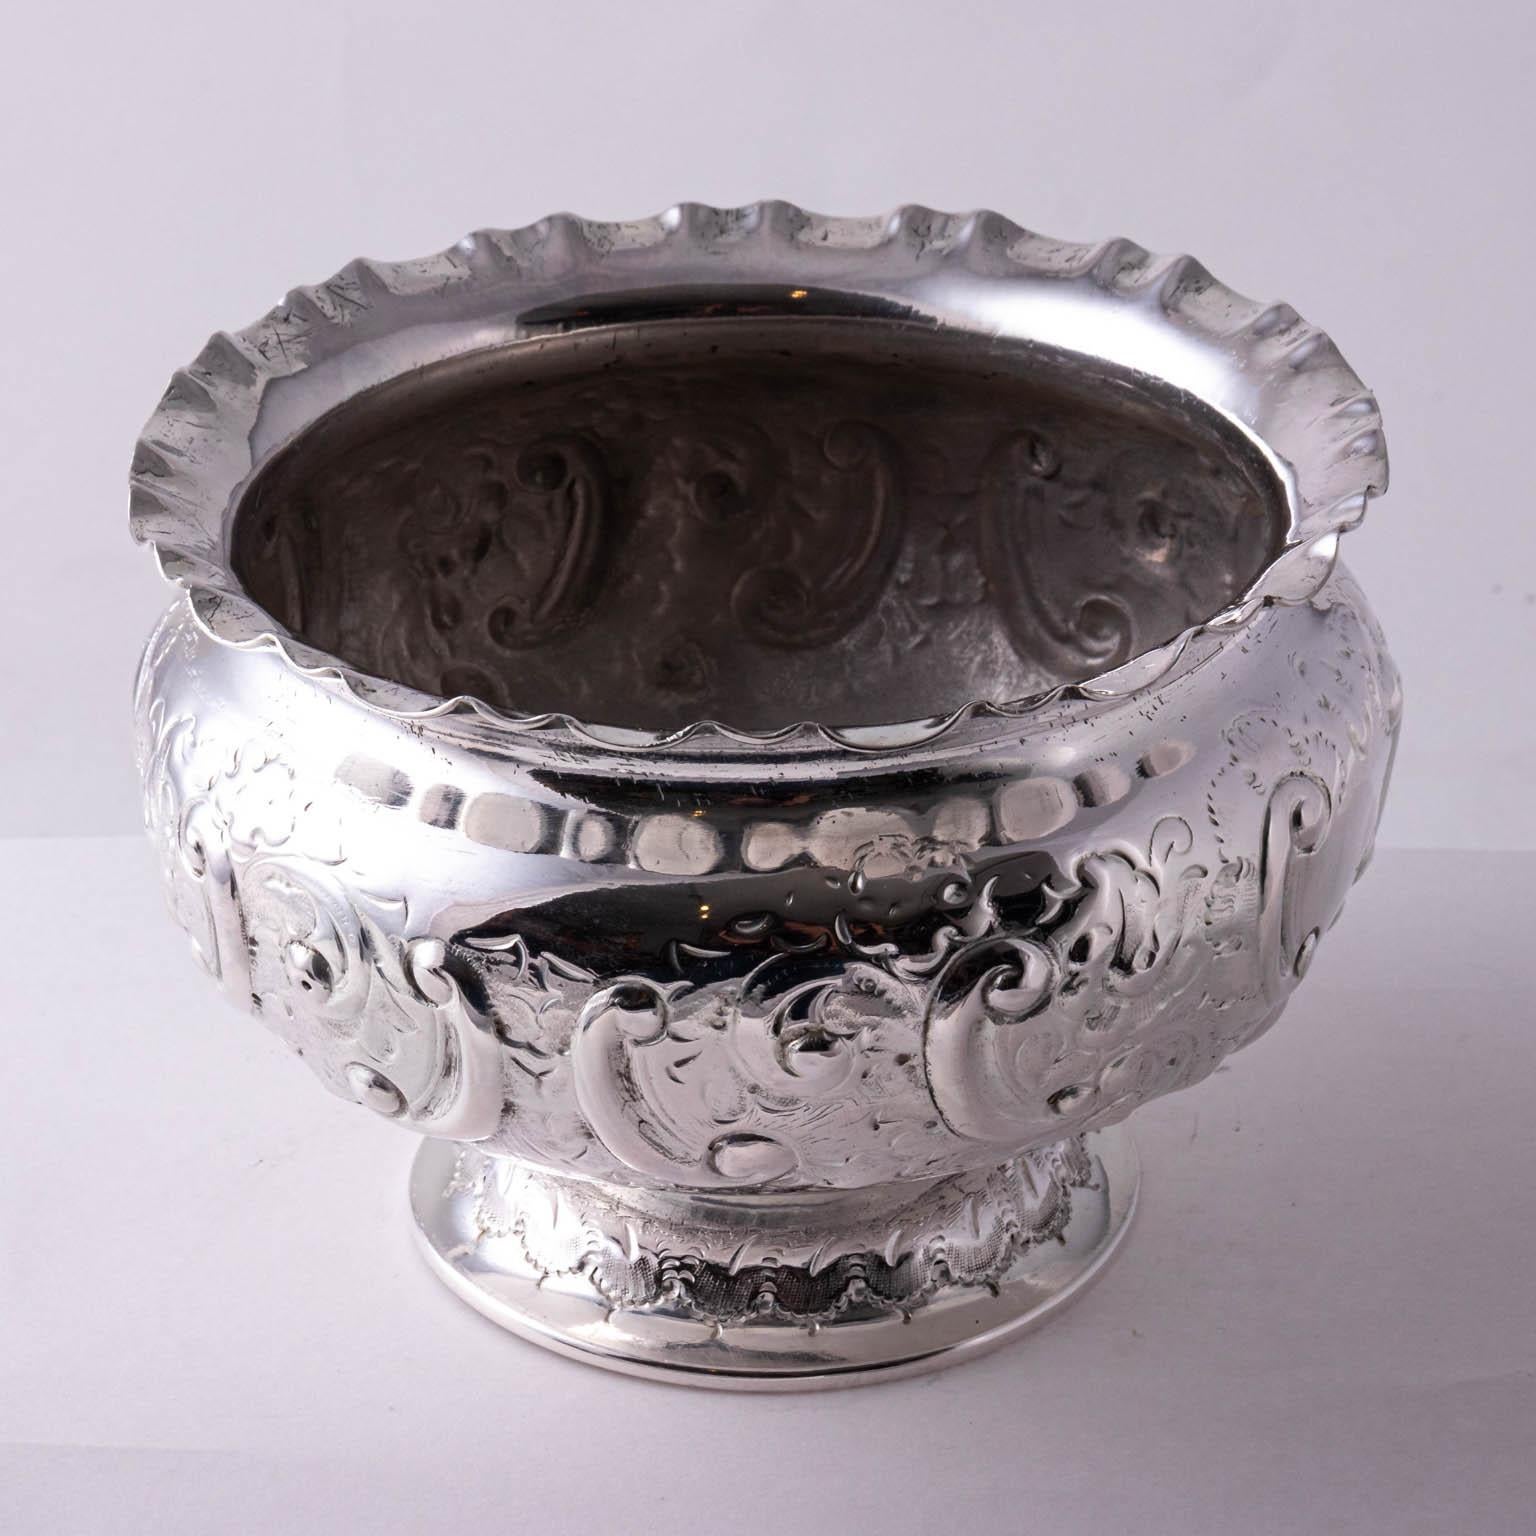 English Victorian silver plate pedestal cachepot, circa 1890s. Made in England. Please note of wear consistent with age.